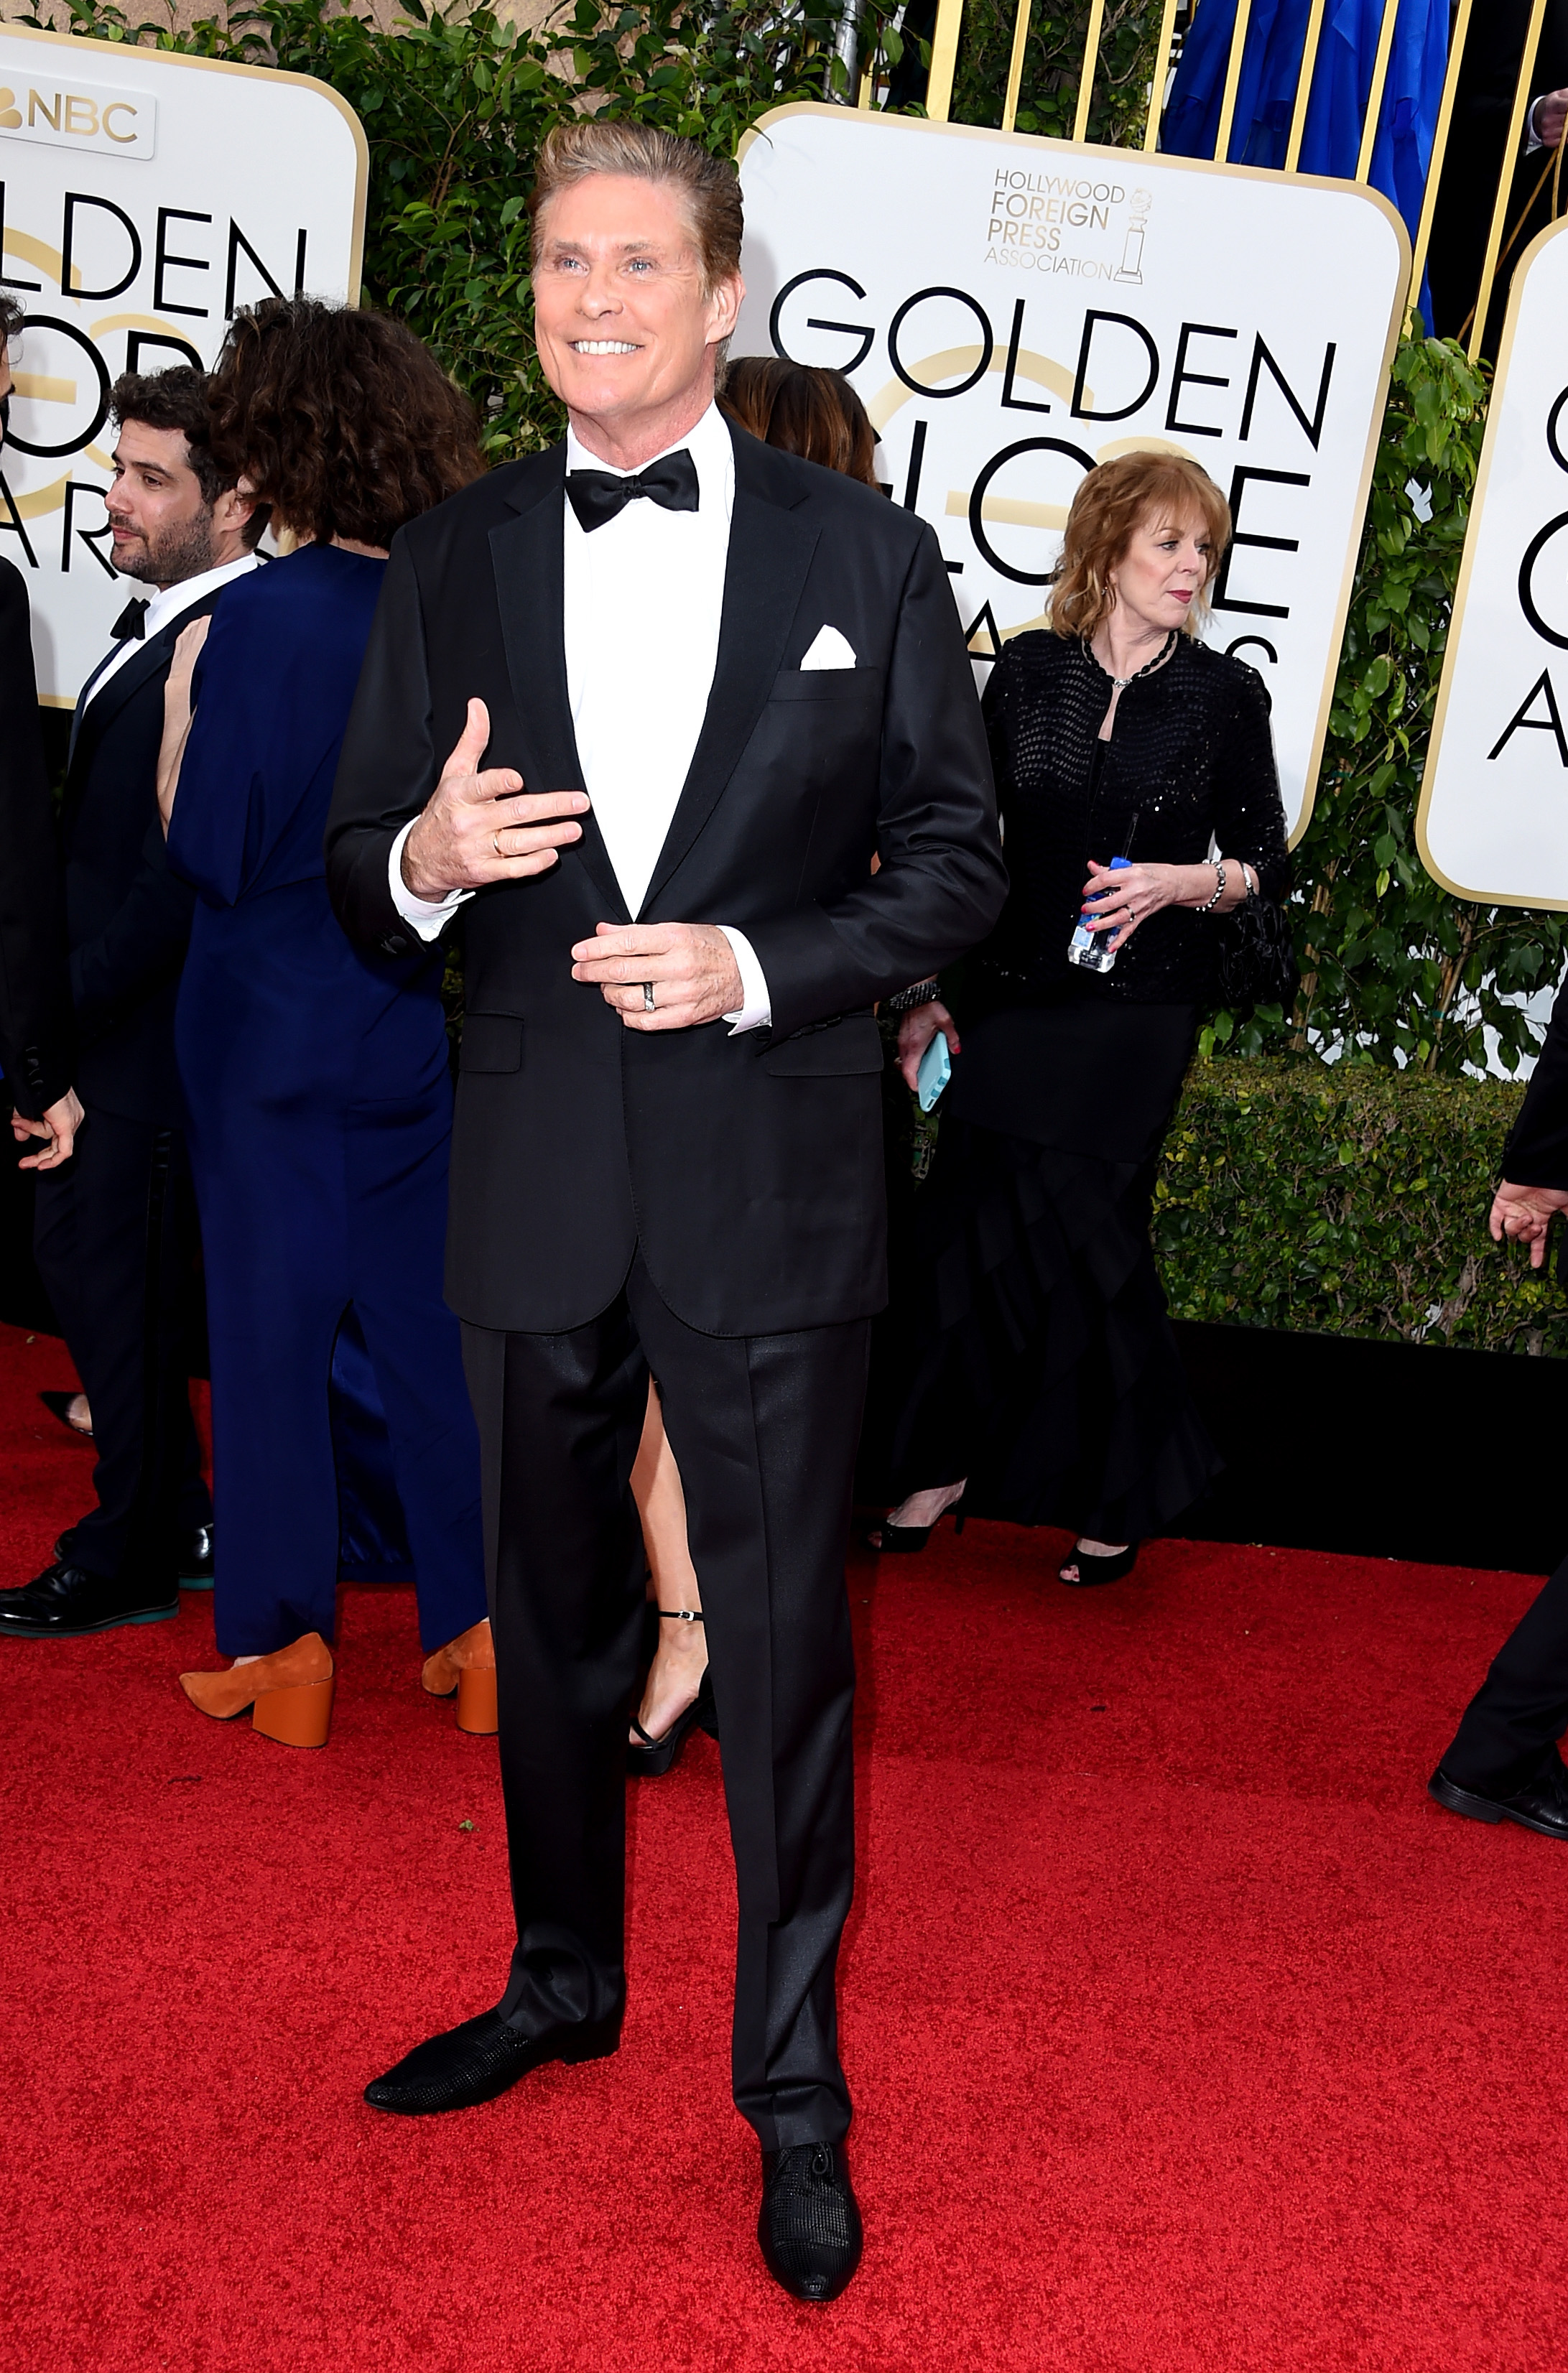 David Hasselhoff arrives to the 73rd Annual Golden Globe Awards on Jan. 10, 2016 in Beverly Hills.